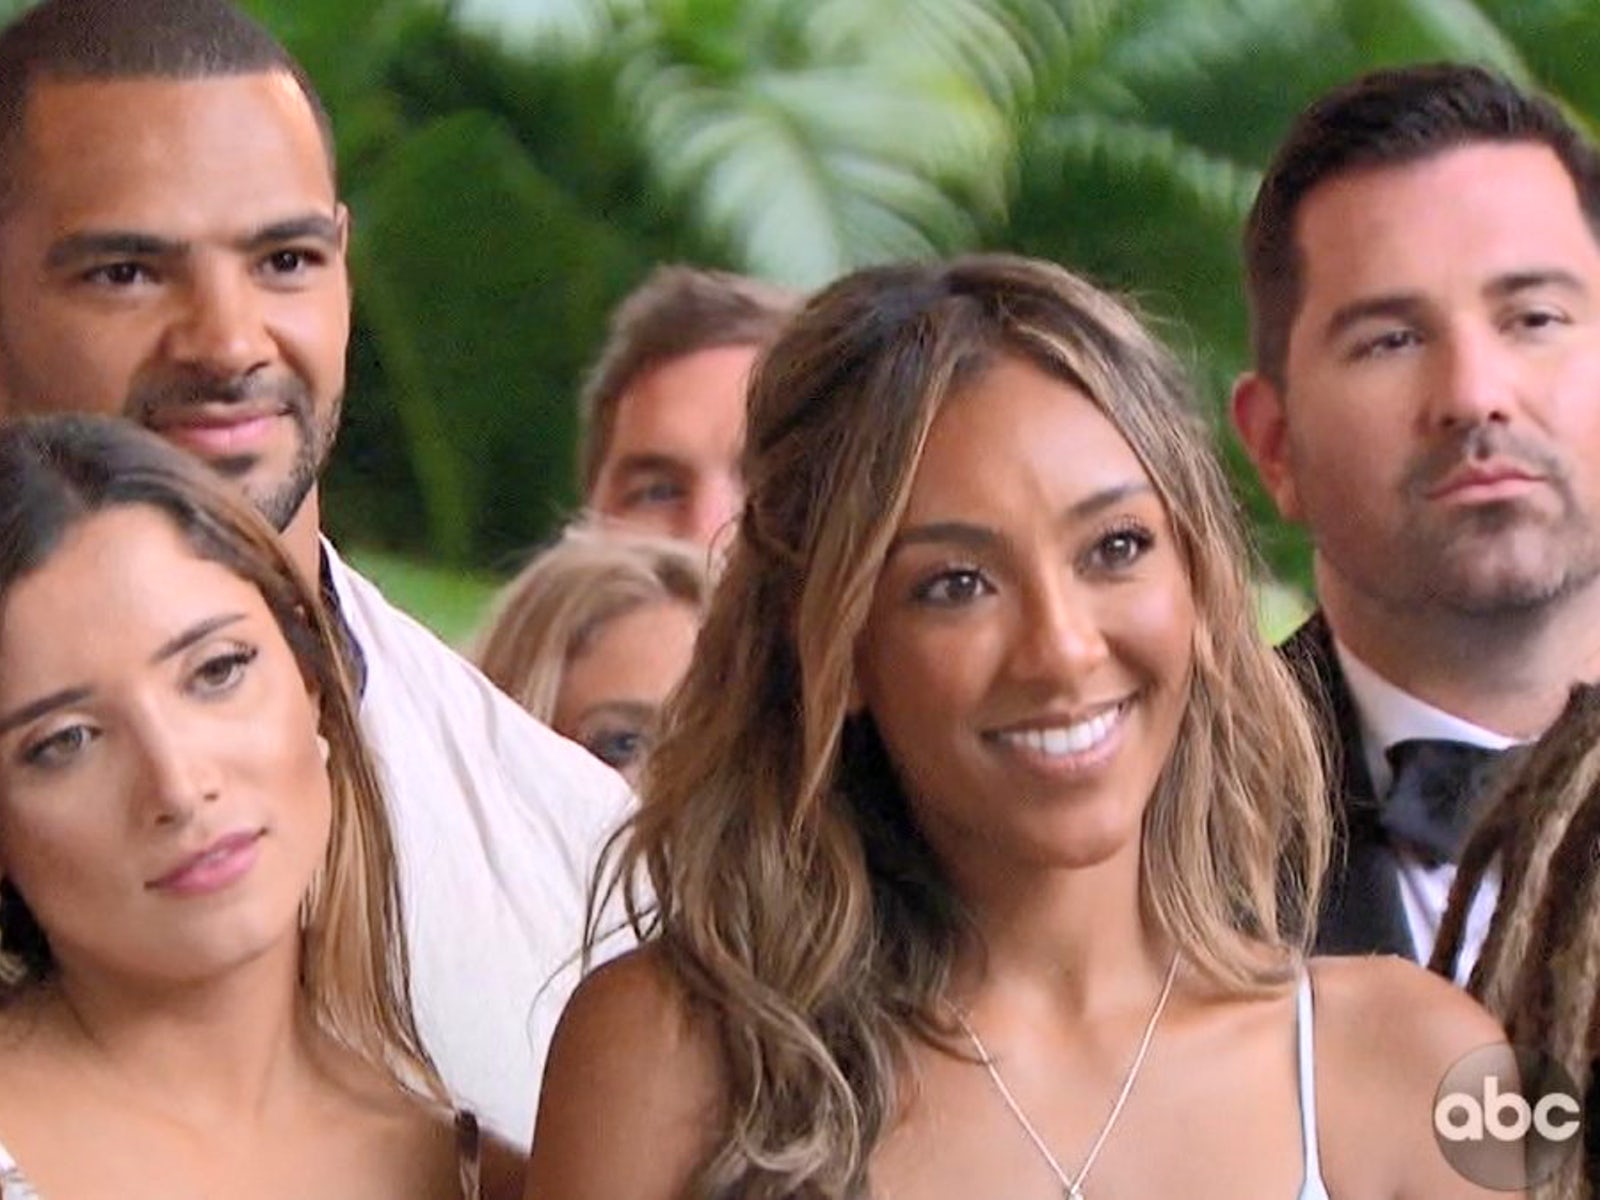 'Bachelor in Paradise' spoilers Which couples get engaged or breakup